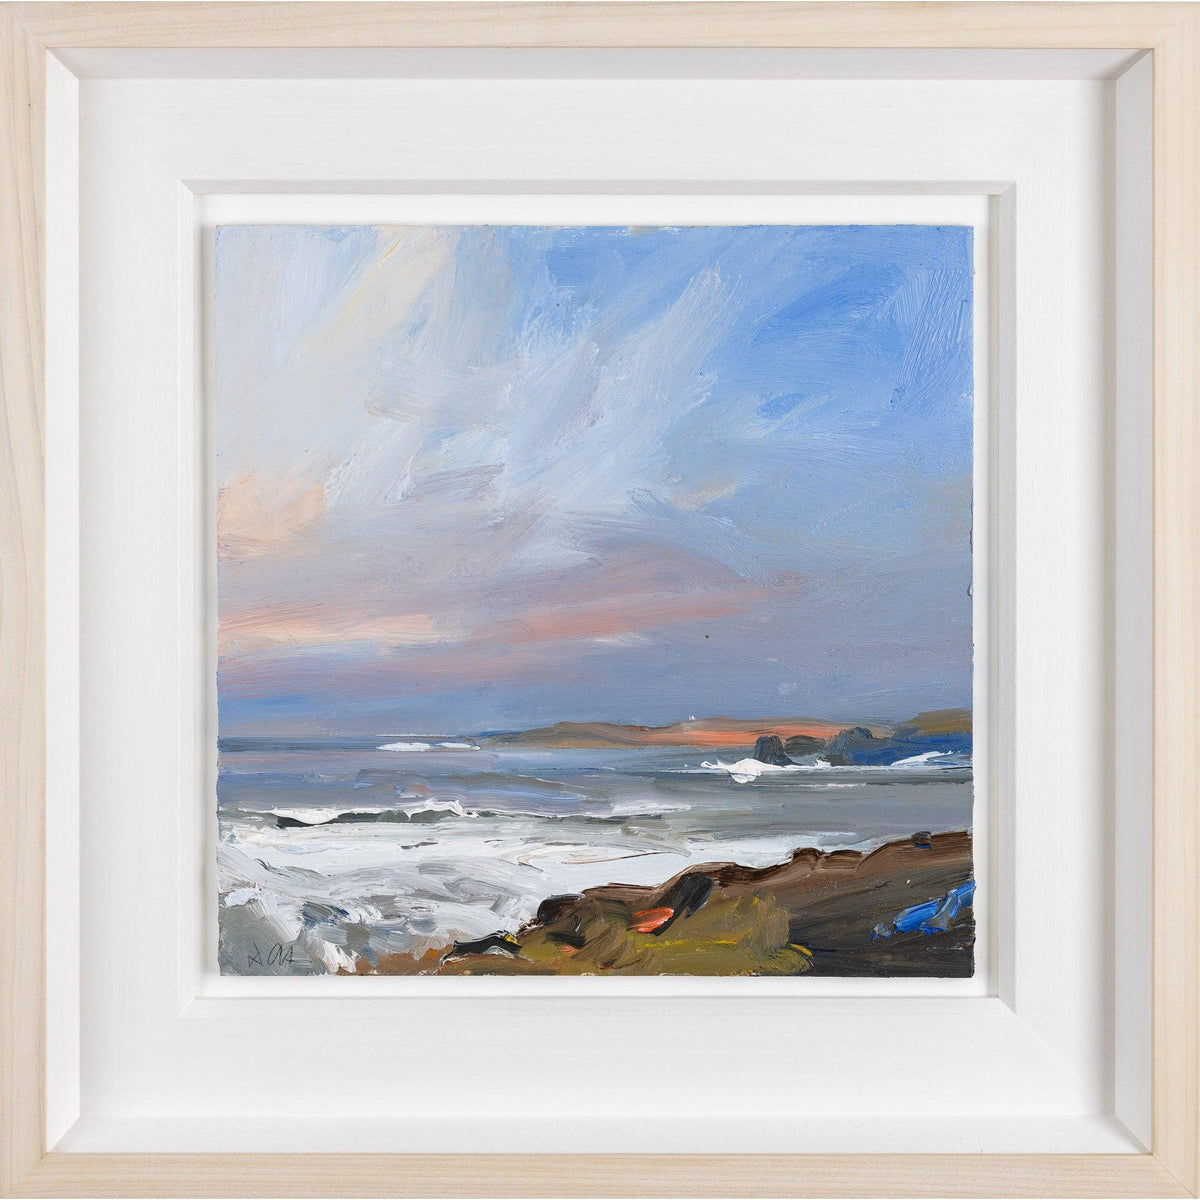 &#39;High Tide, Porthcothan Beach&#39; oil on board original by David Atkins, available at Padstow Gallery, Cornwall